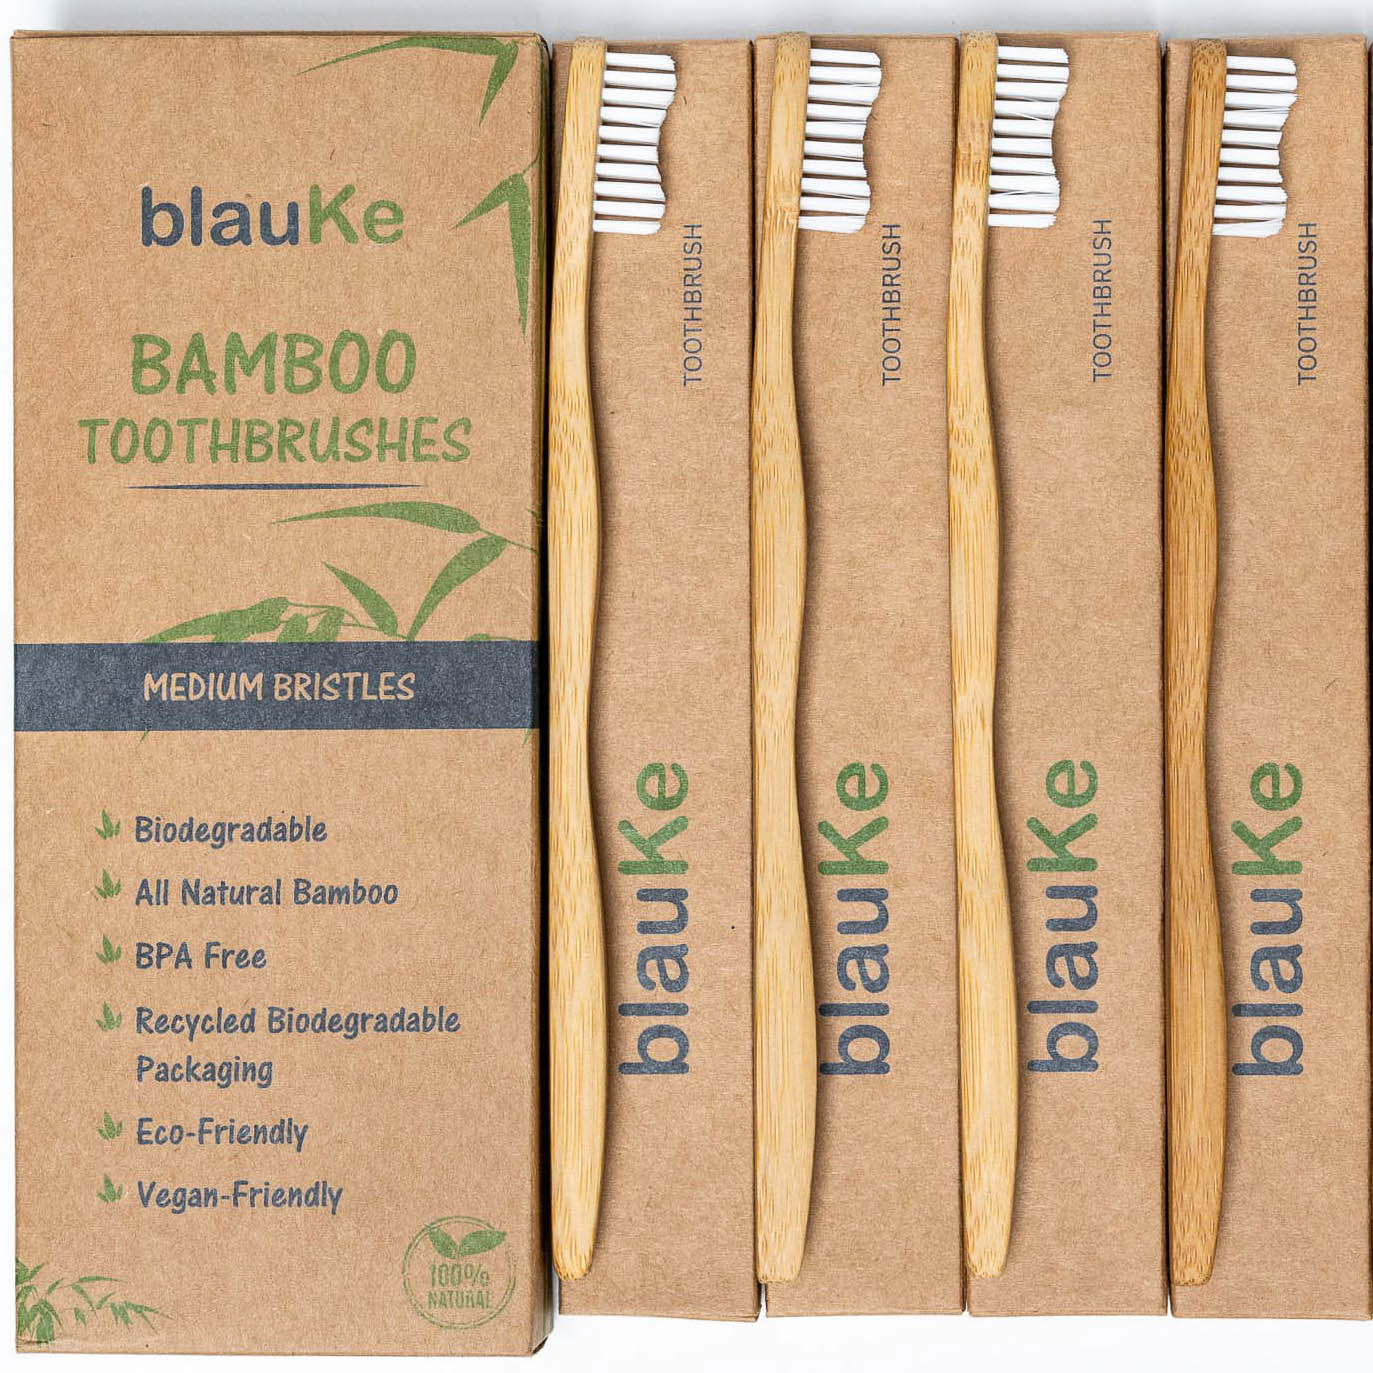 Bamboo Toothbrush Set 4-Pack - Bamboo Toothbrushes with Medium Bristles for Adults - Eco-Friendly, Biodegradable, Natural Wooden Toothbrushes